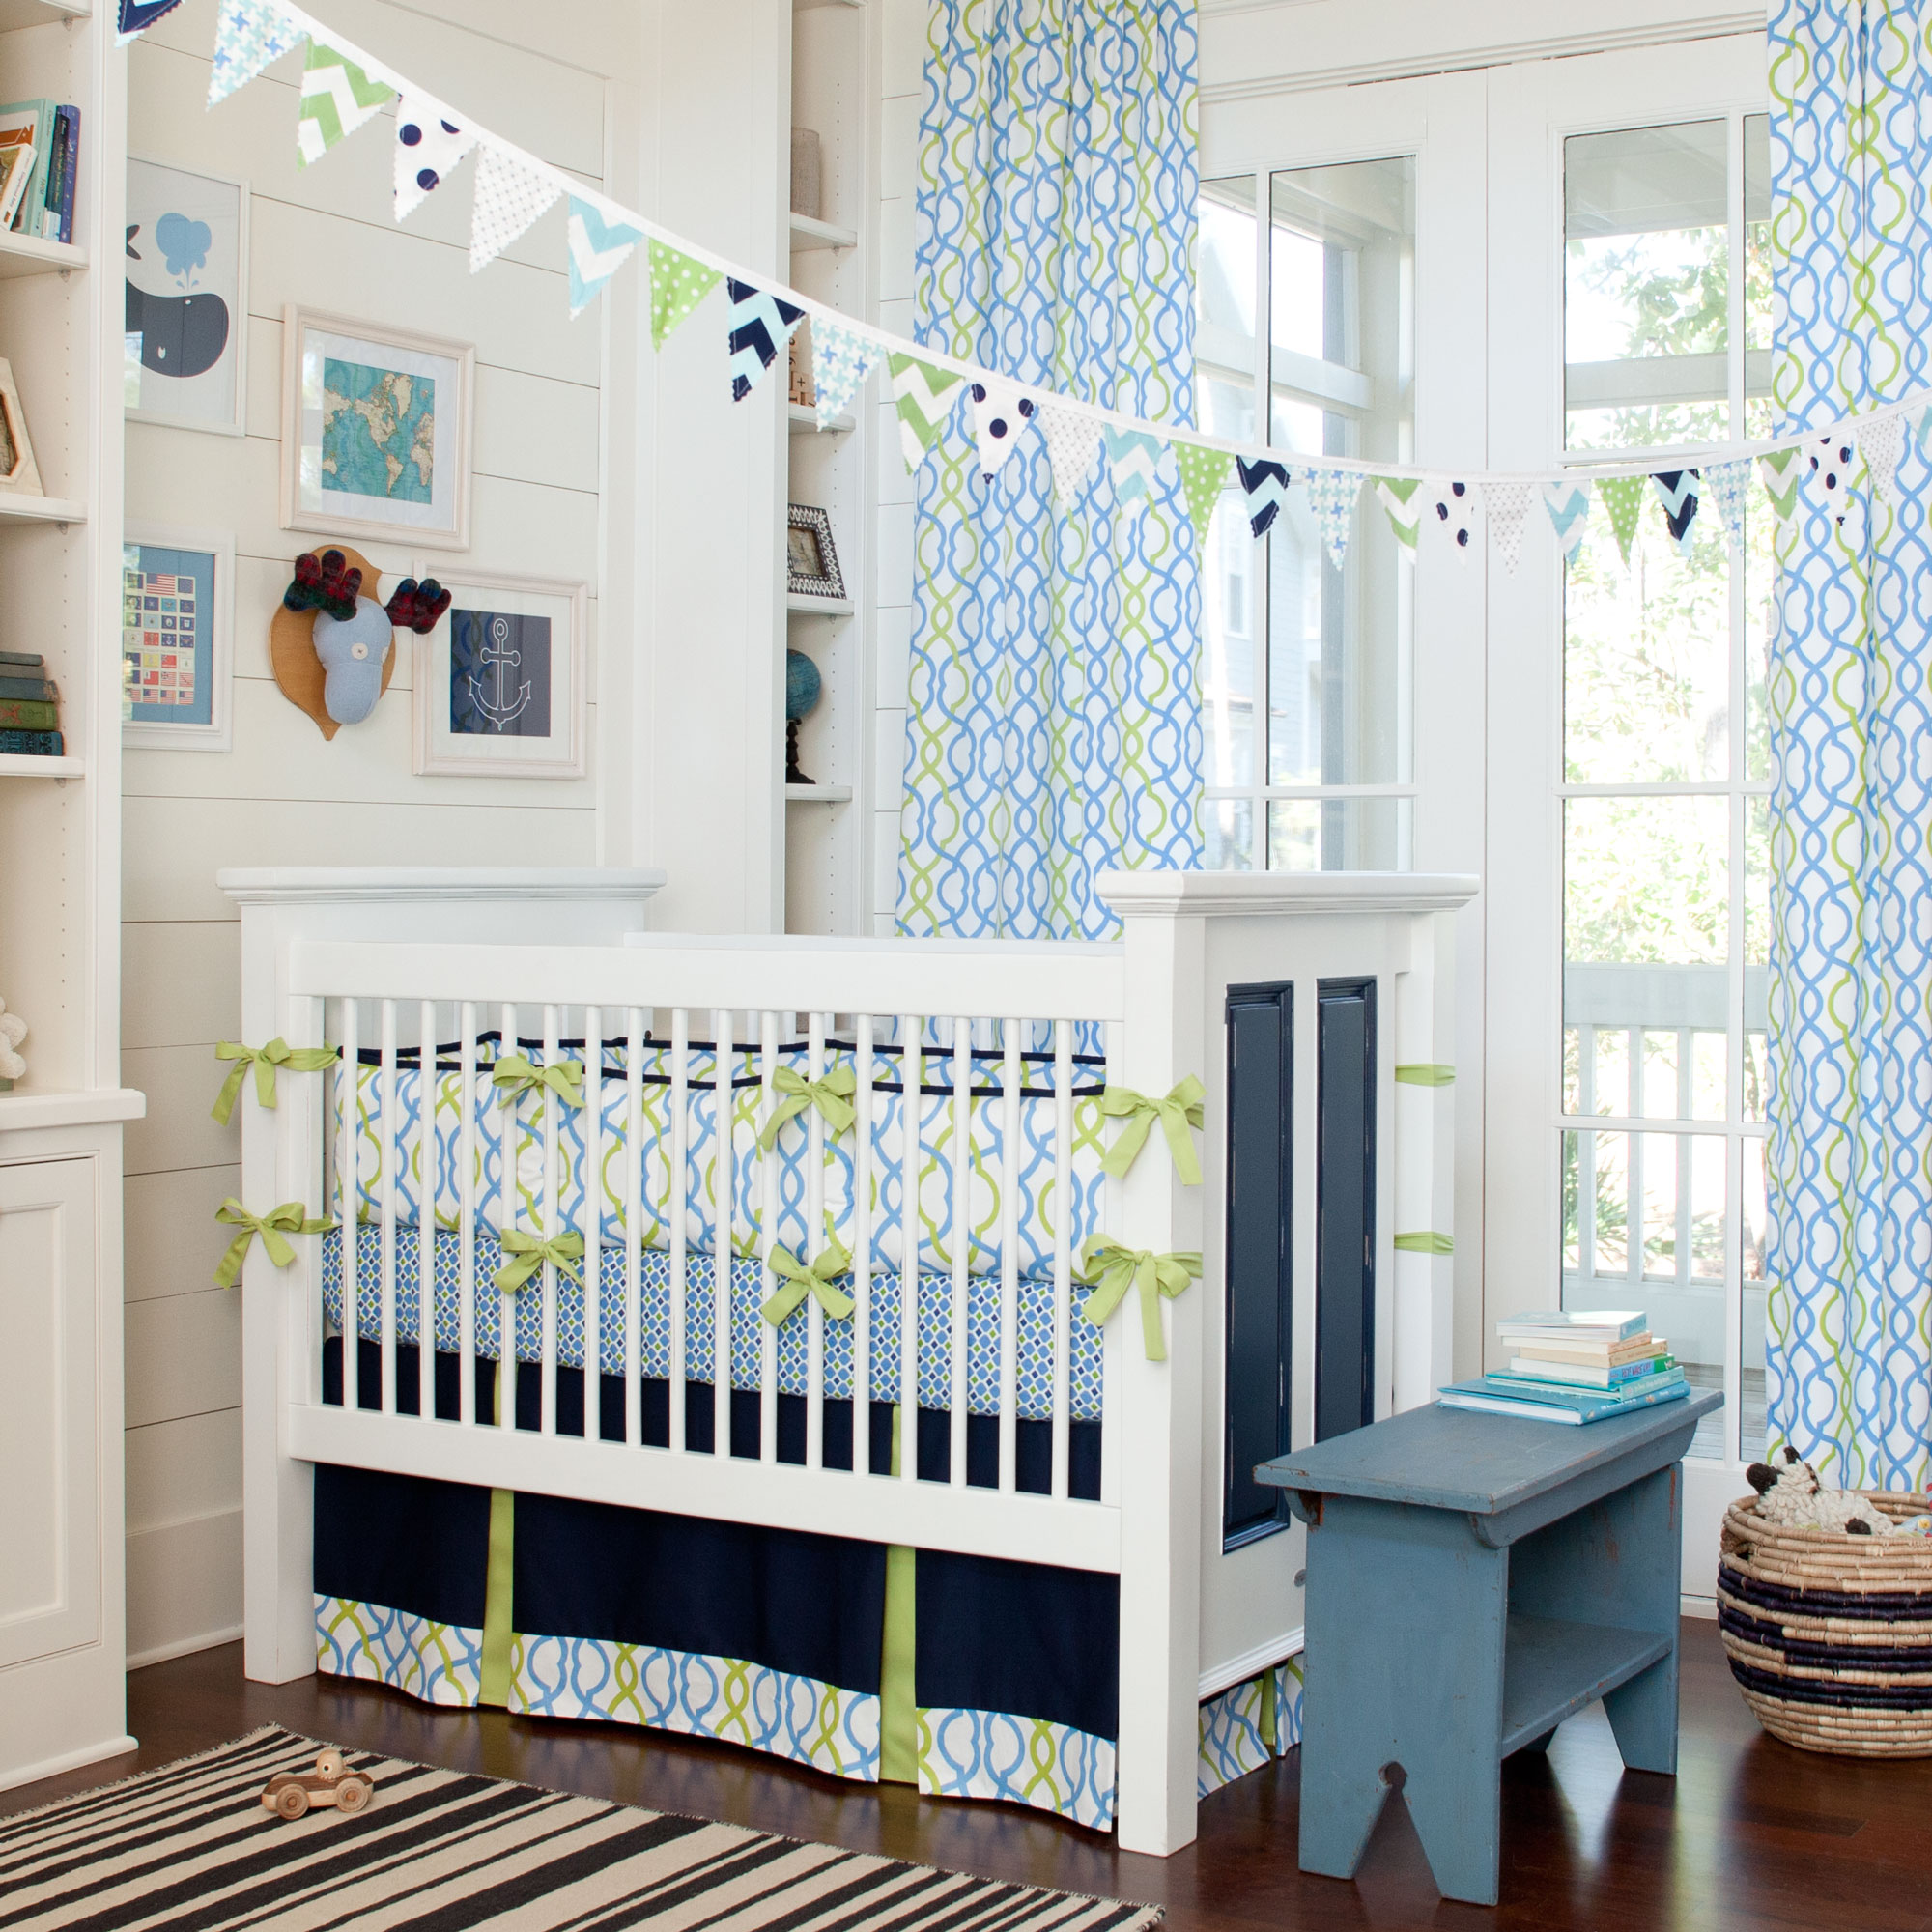 Blue Themed With Trendy Blue Themed Nursery Idea With Baby Boy Crib Bedding Decorated With Patterned Banners And Curtain Dream Homes Enchanting Baby Boy Crib Bedding Applied In Colorful Baby Room